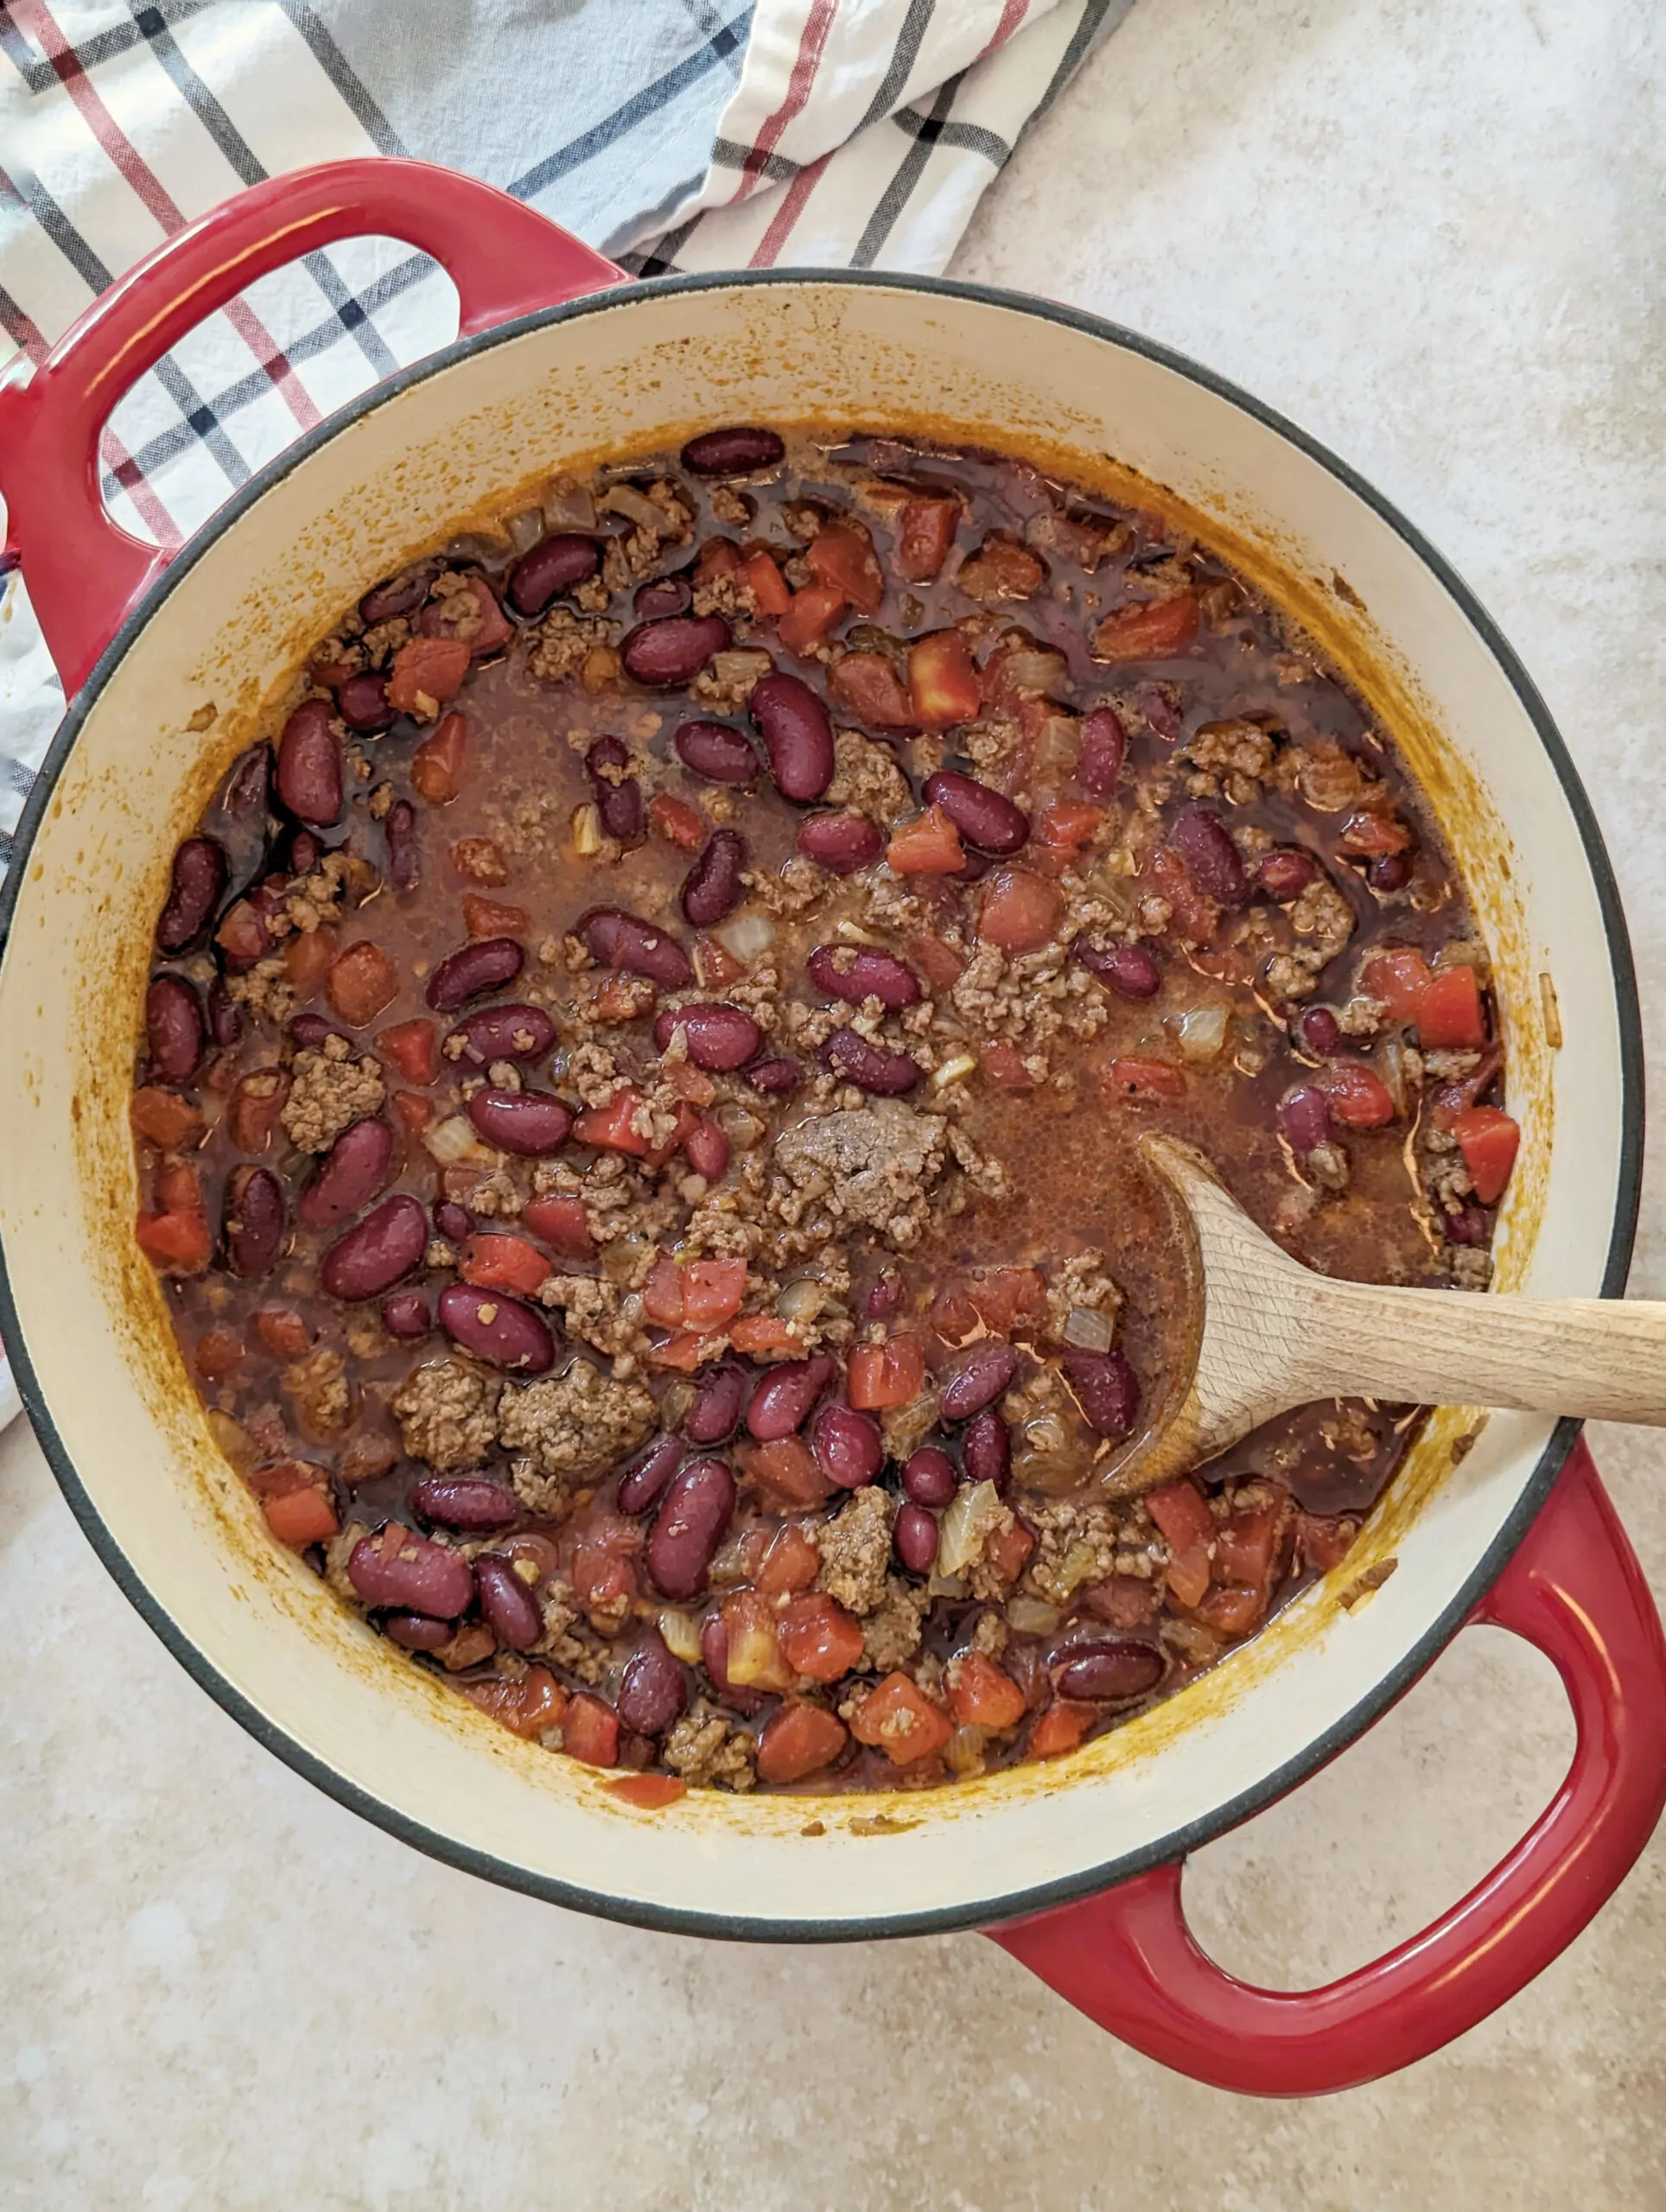 Easy Dutch Oven Chili Recipe - Stovetop Chili with Beans or Not